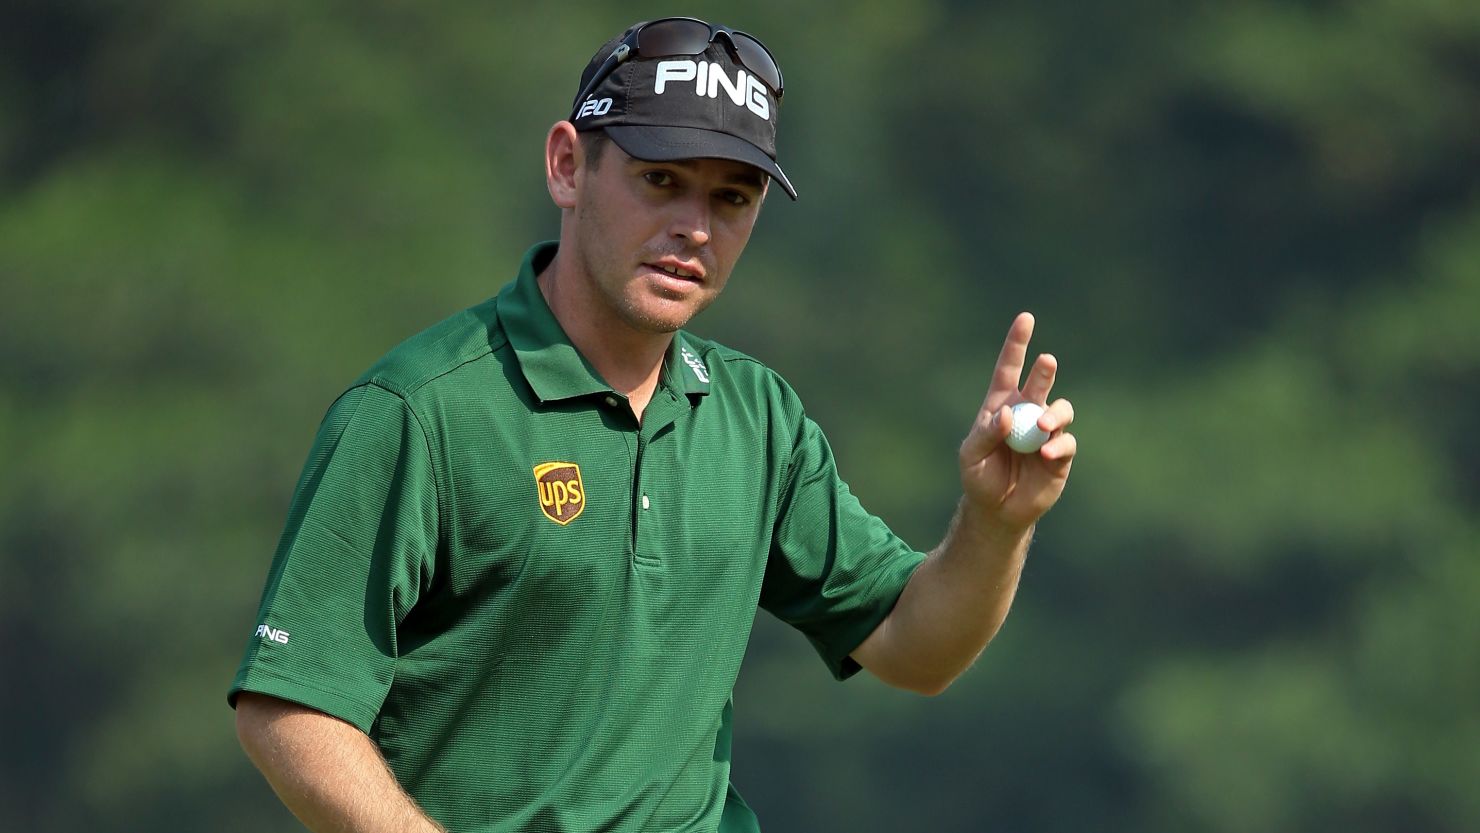 South Africa's Louis Oosthuizen picked up the only major win of his career at the 2010 British Open.